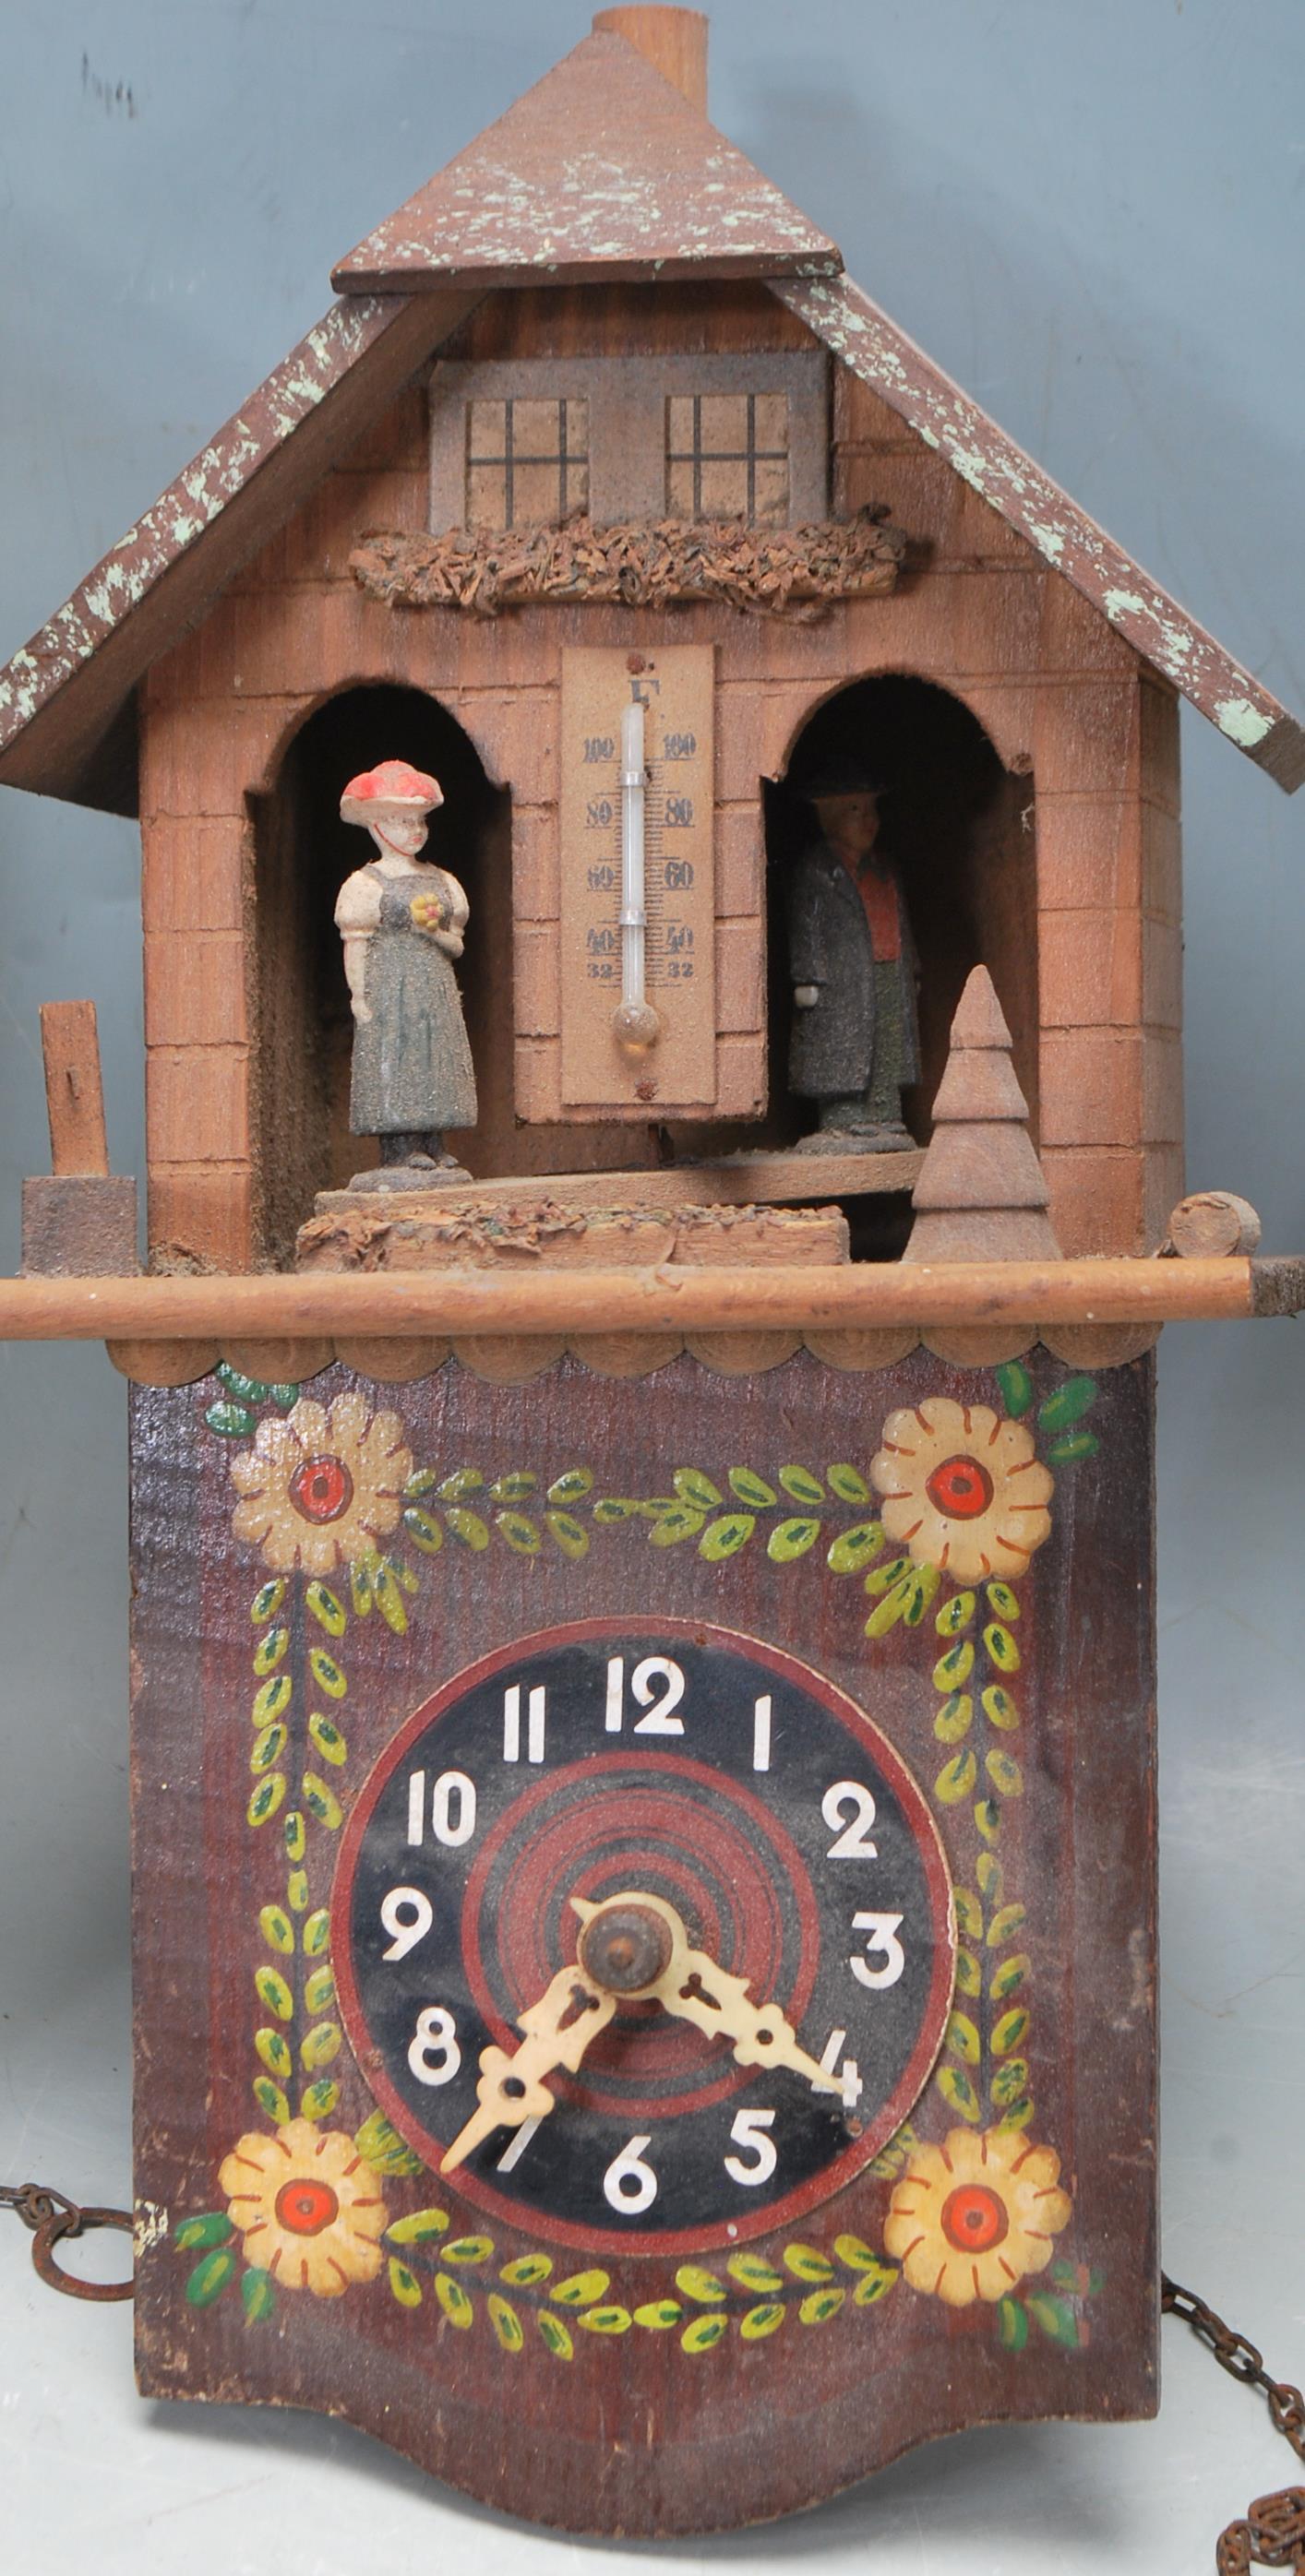 TWO EARLY 20TH CENTURY GERMAN BLACK FOREST CUCKOO CLOCKS - Image 5 of 7